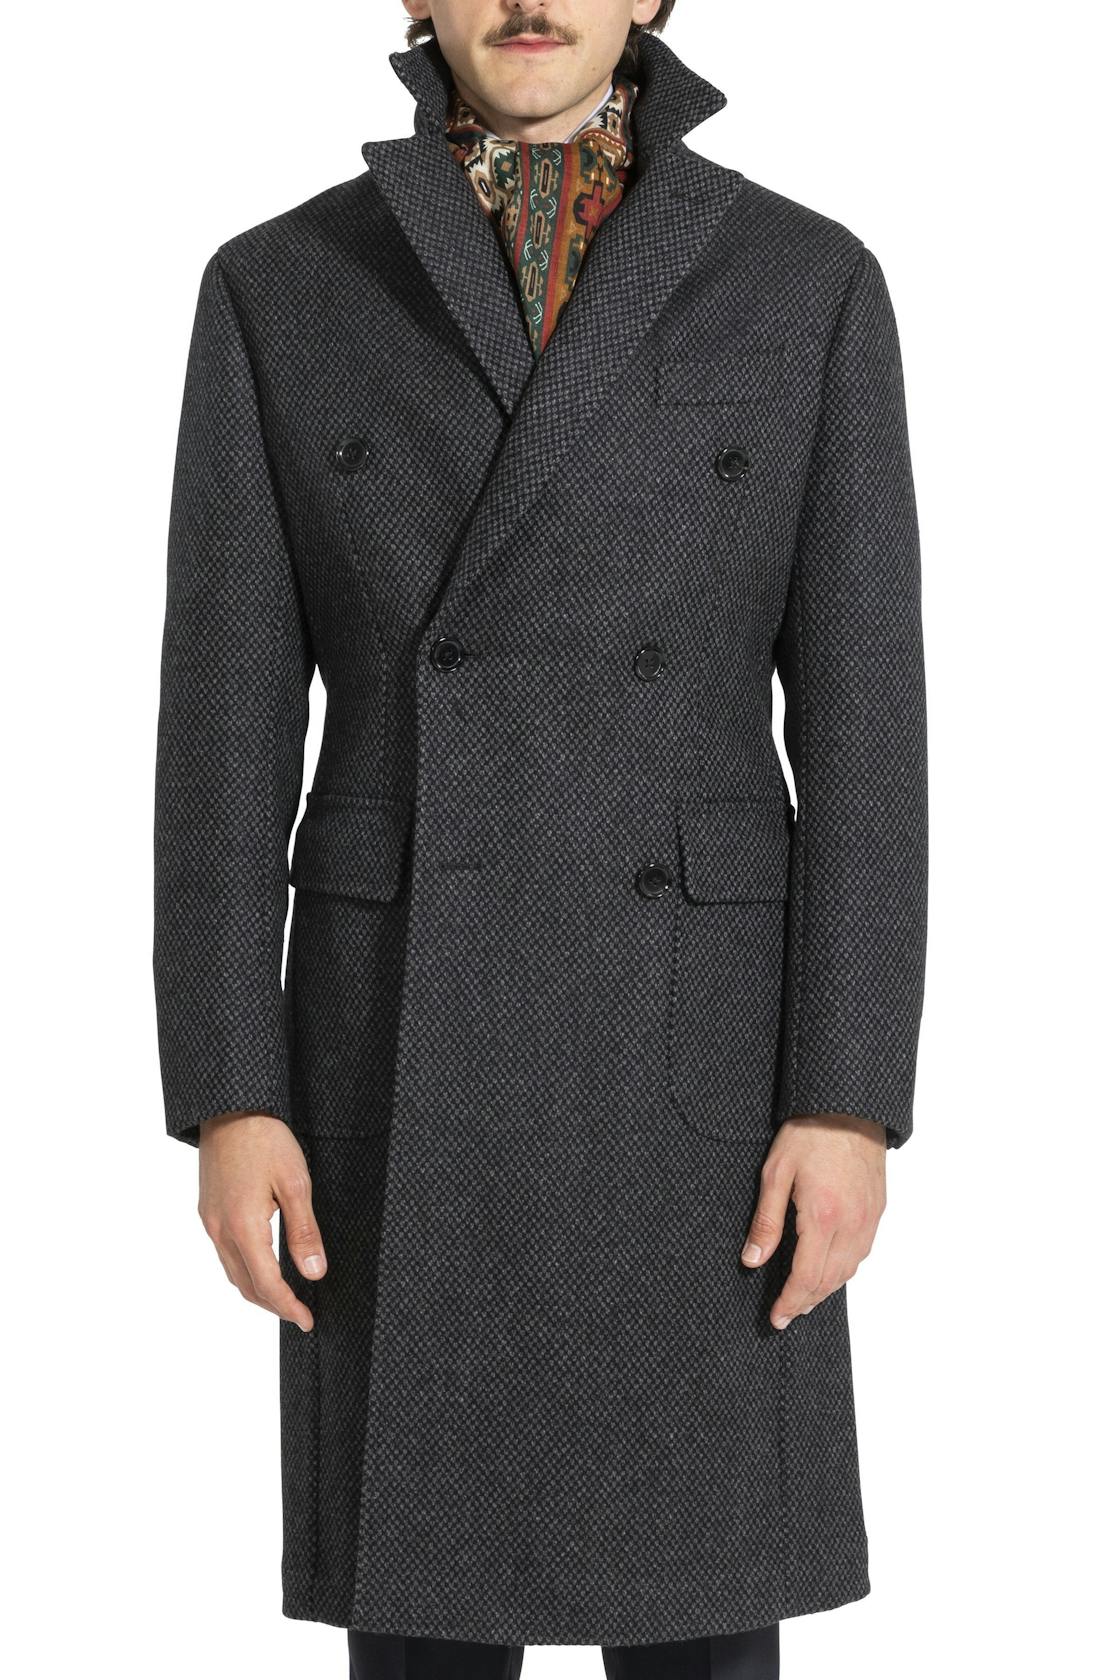 The Armoury by Ring Jacket RC66 Charcoal Wool Barleycorn DB Overcoat